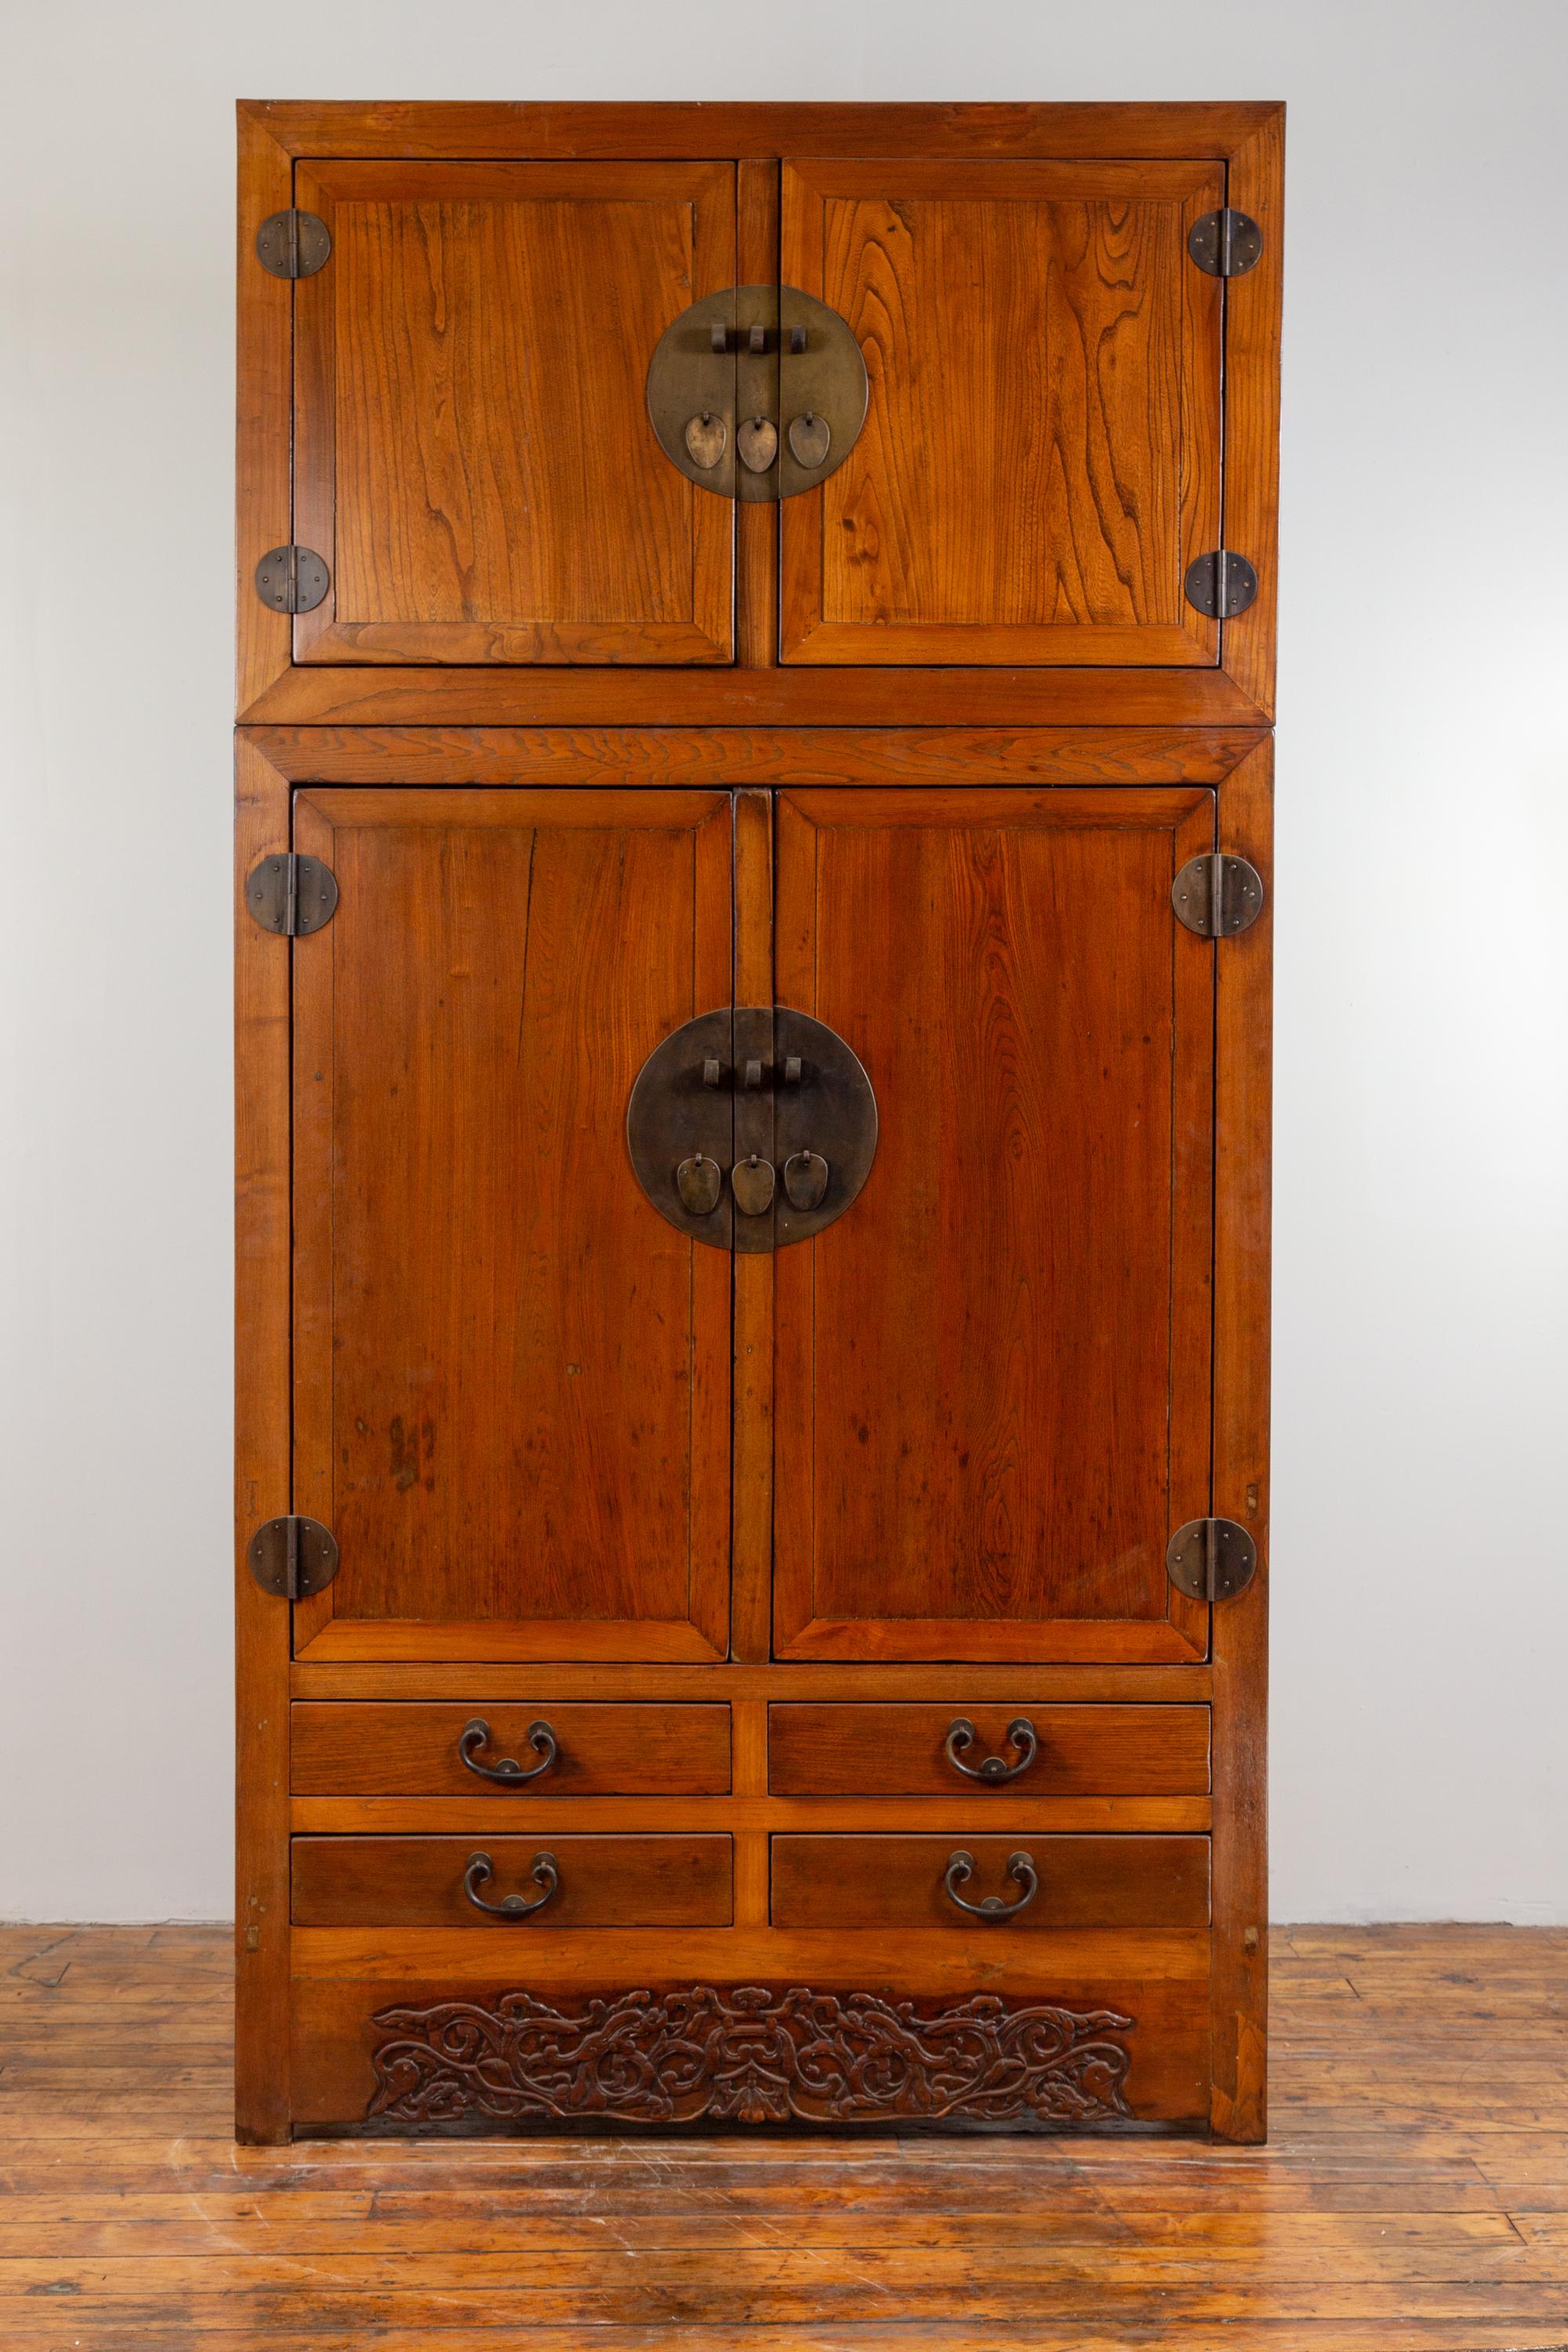 A Chinese Ming dynasty style two-section compound wedding wardrobe, with carved floral skirt, two sets of double doors, lower drawers and brass hardware. Born in China during the early years of the 20th century, this large compound wardrobe features